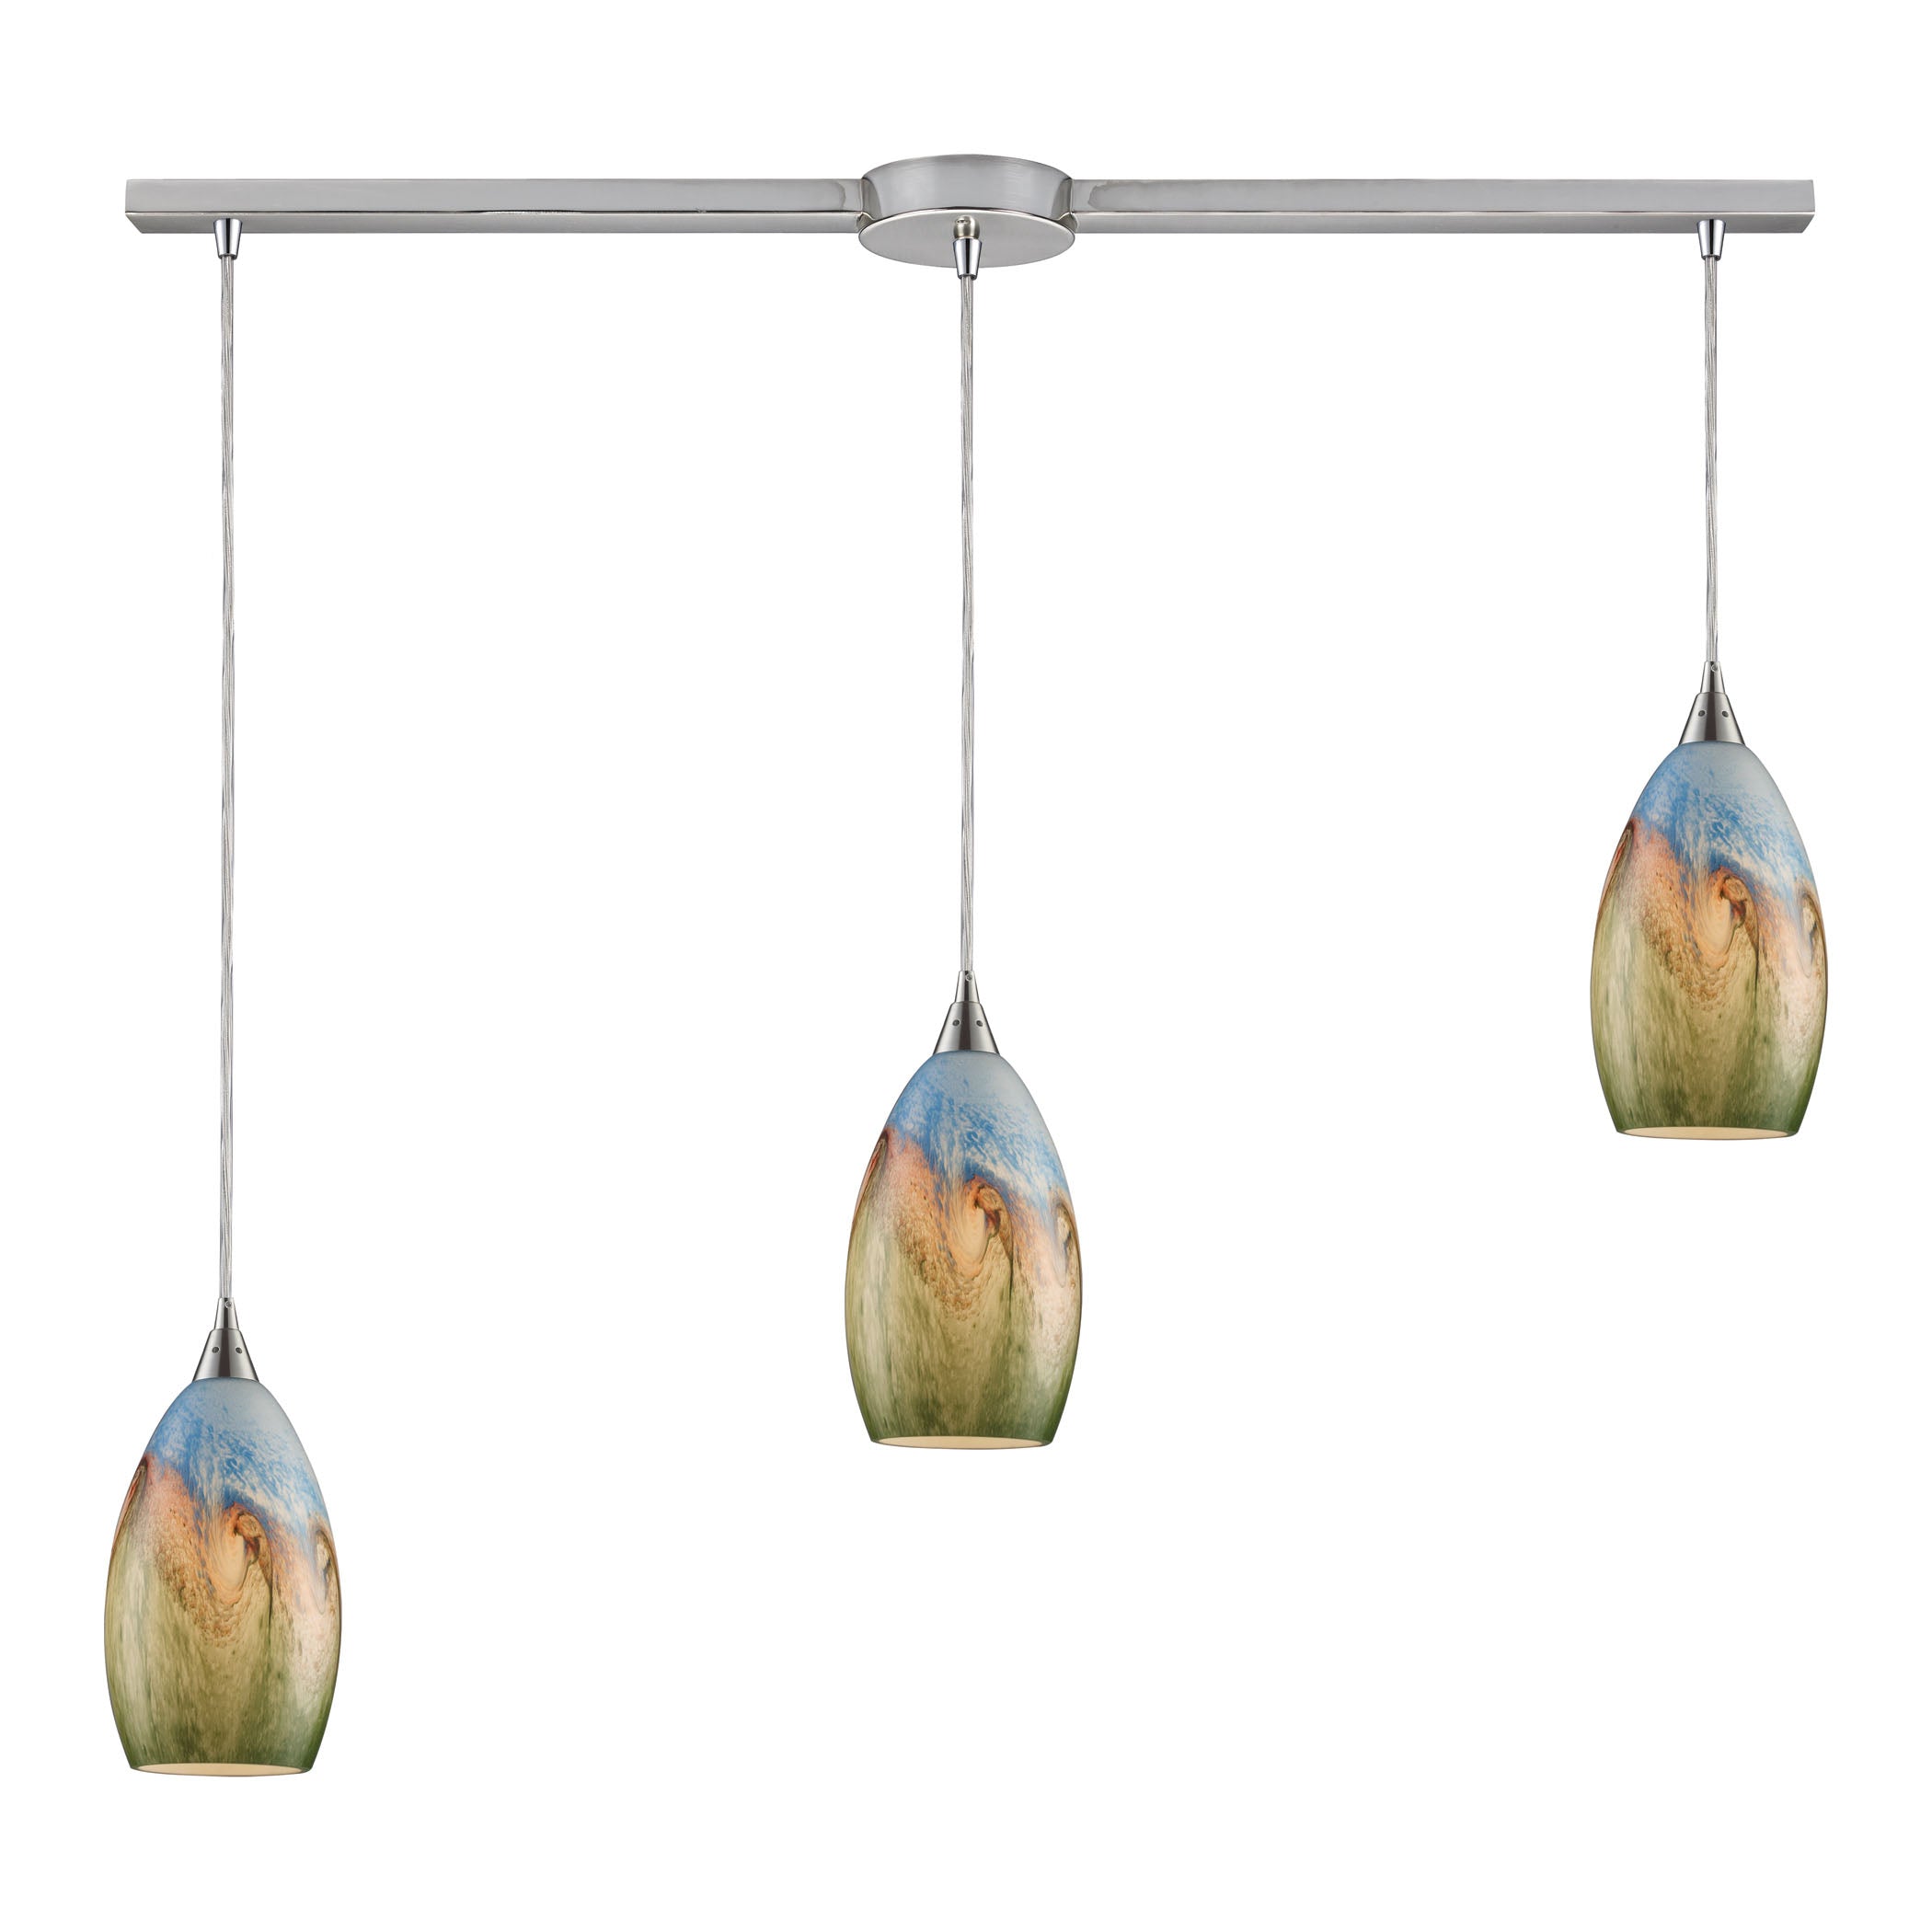 ELK Lighting 10077/3L Geologic 3-Light Linear Pendant Fixture in Satin Nickel with Multi-colored Glass